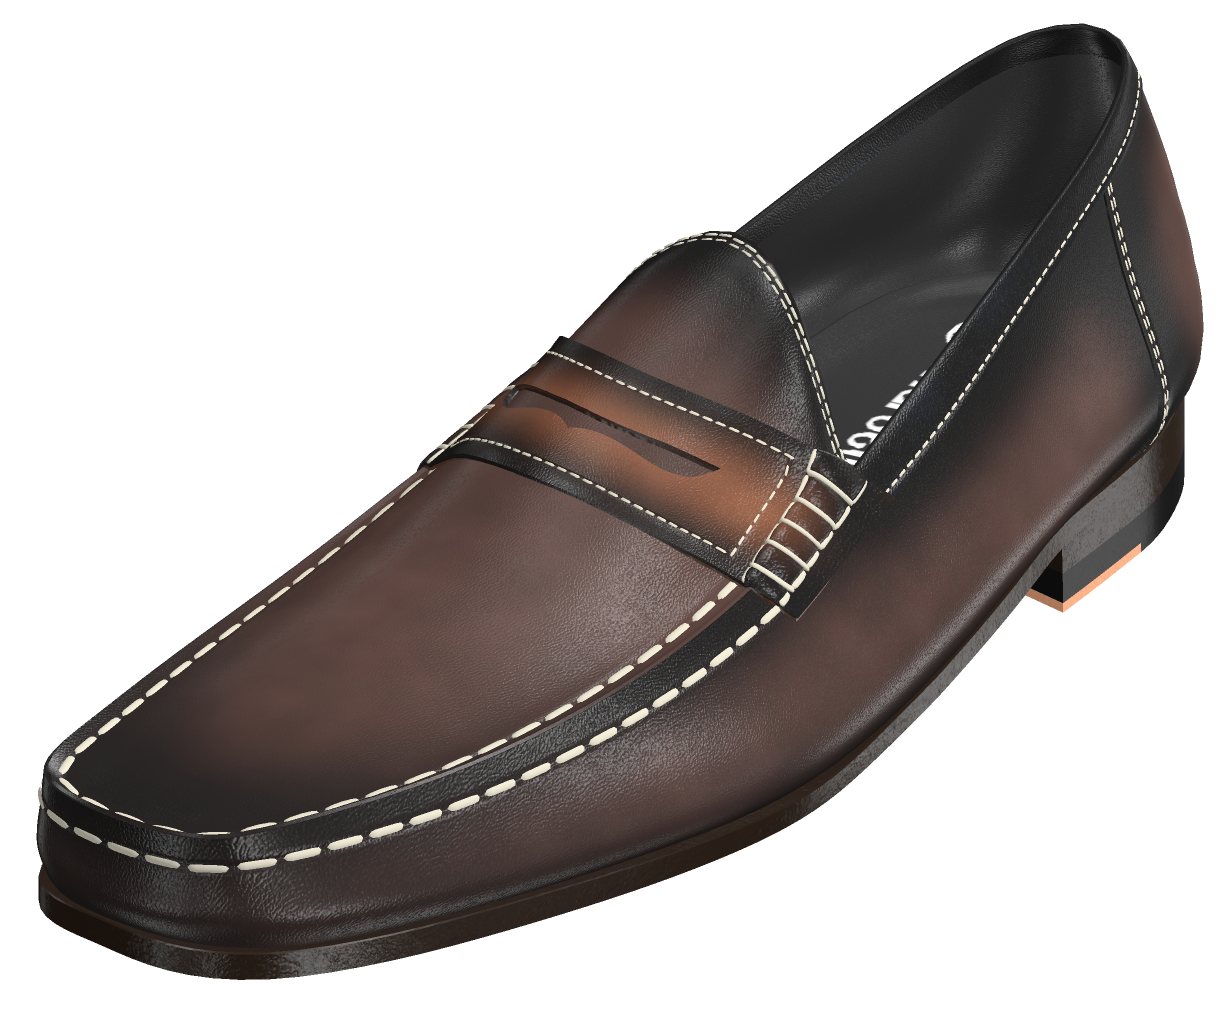 Black Leather Loafers with Black Dress Pants Outfits For Men (127 ideas &  outfits)